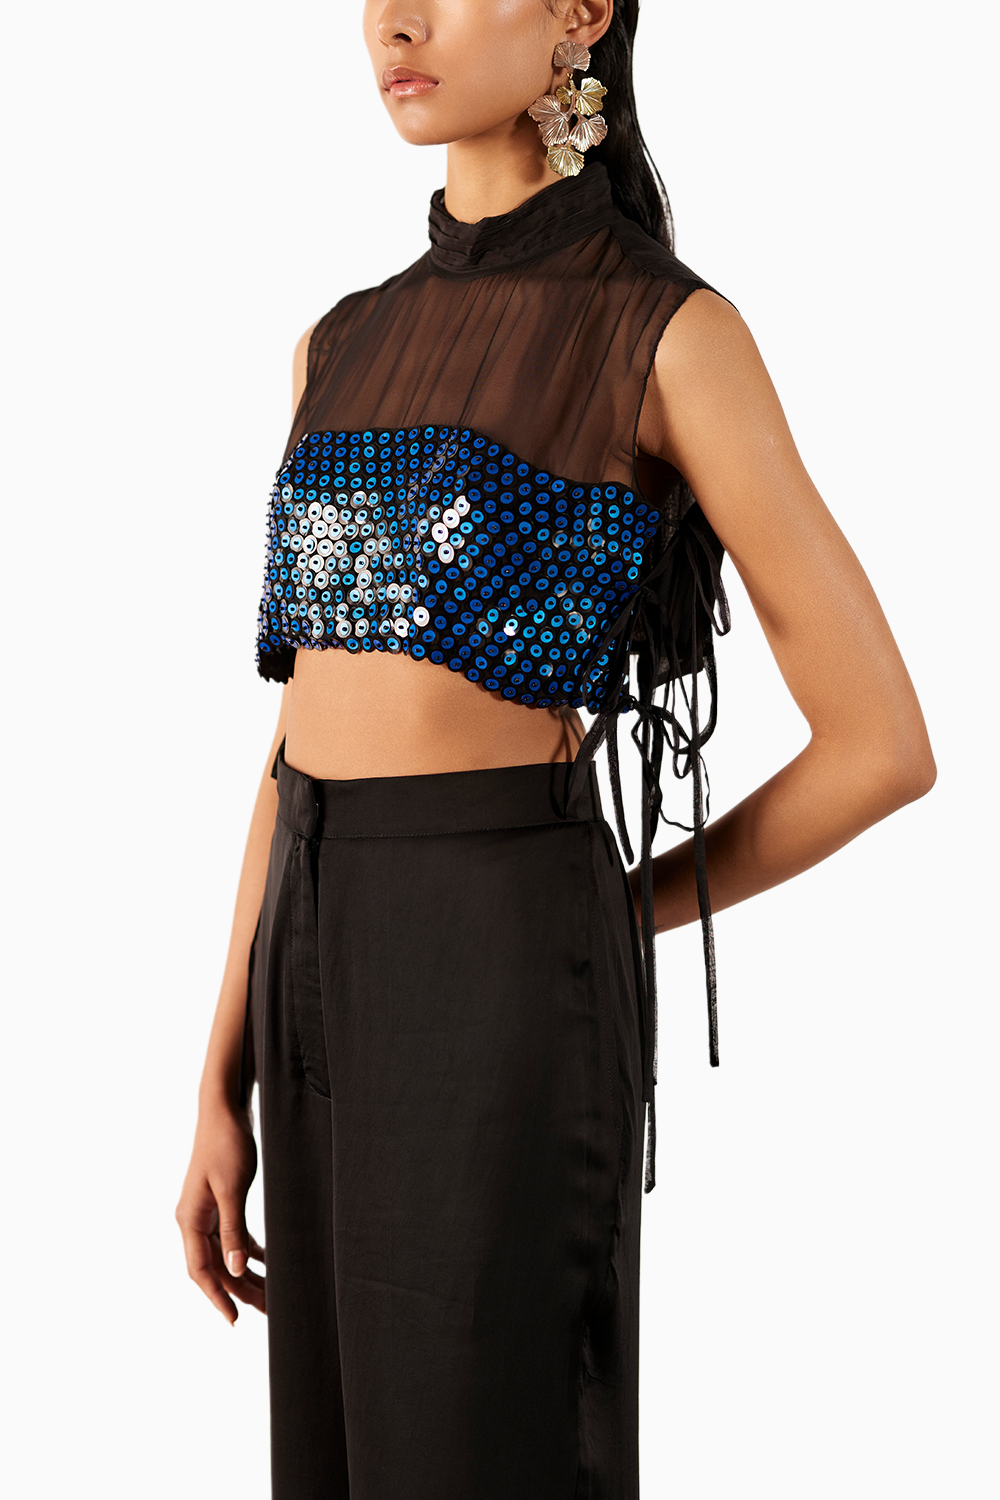 Firefly Top With Blue/Black Ombre Pants